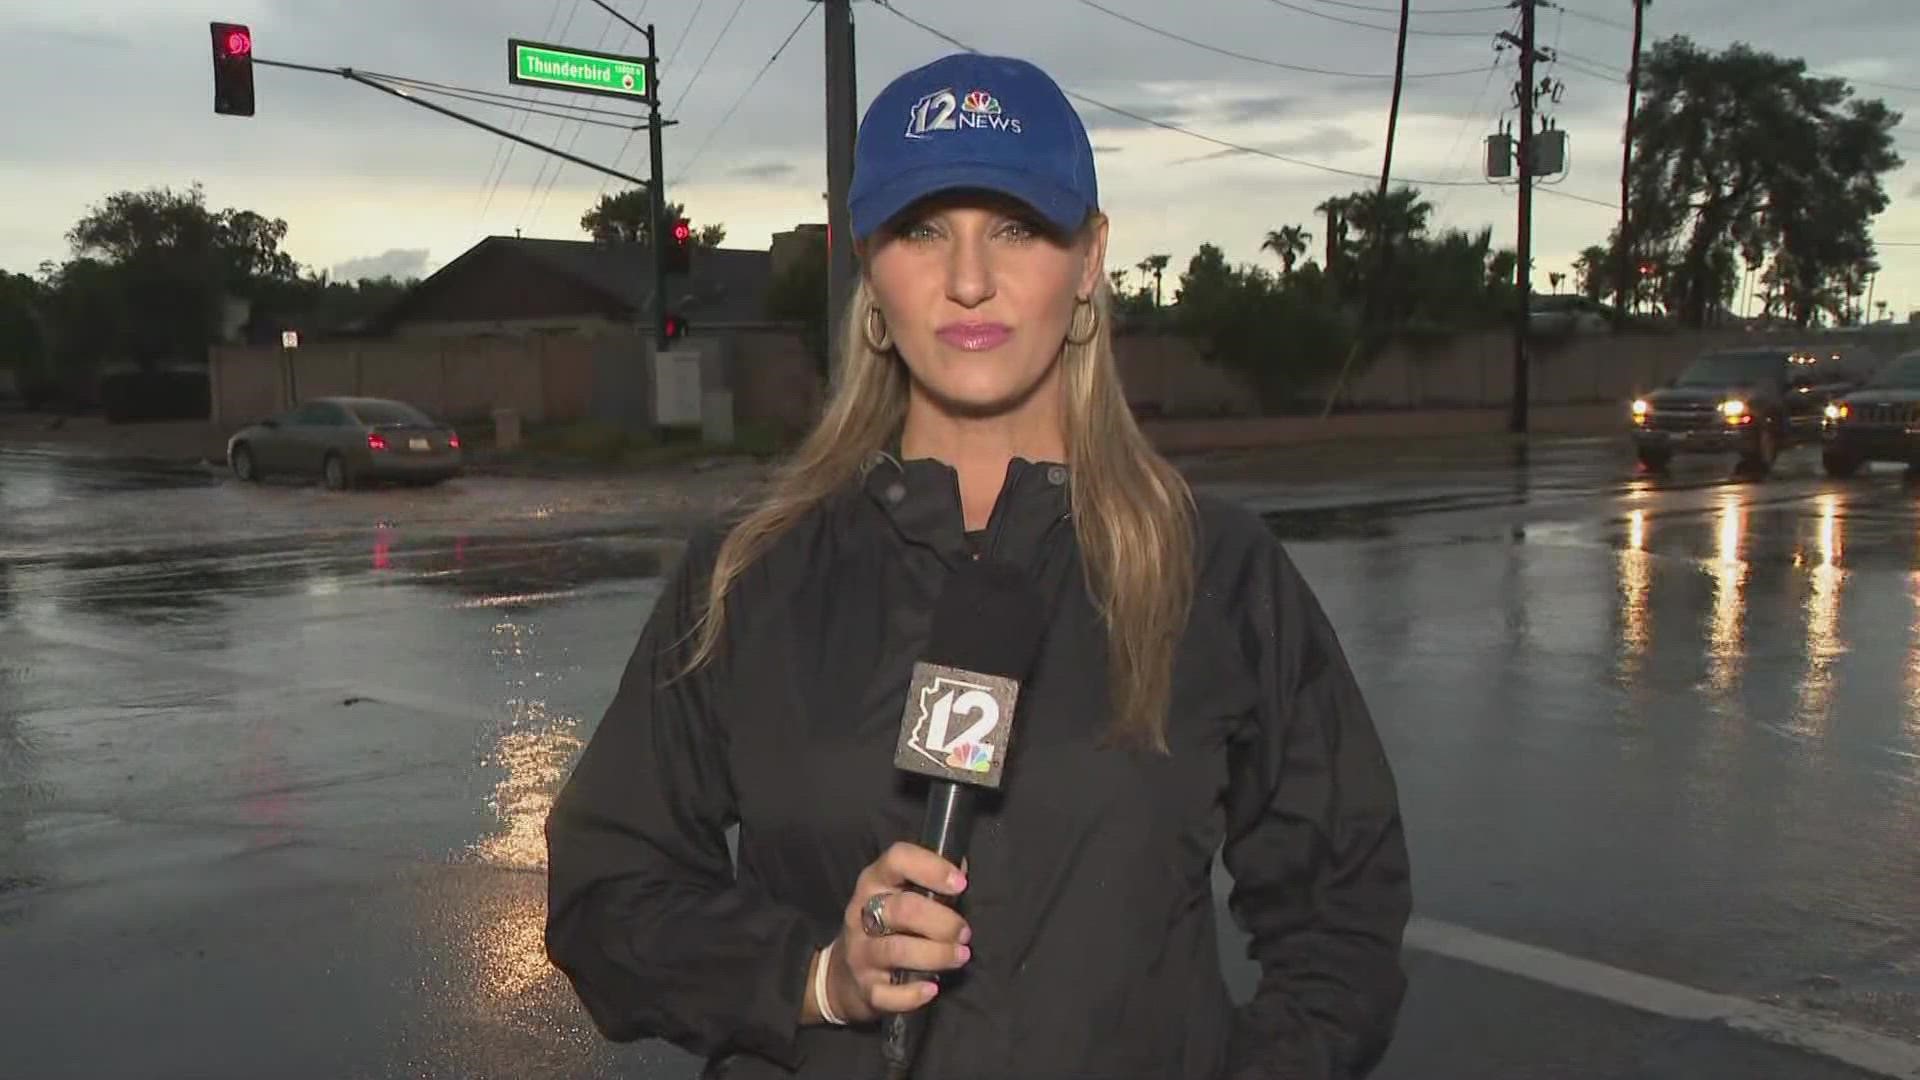 Monsoon rains made their way across the Valley Thursday morning with some areas receiving almost an inch of rain. Here's the latest updates from the Today in AZ team